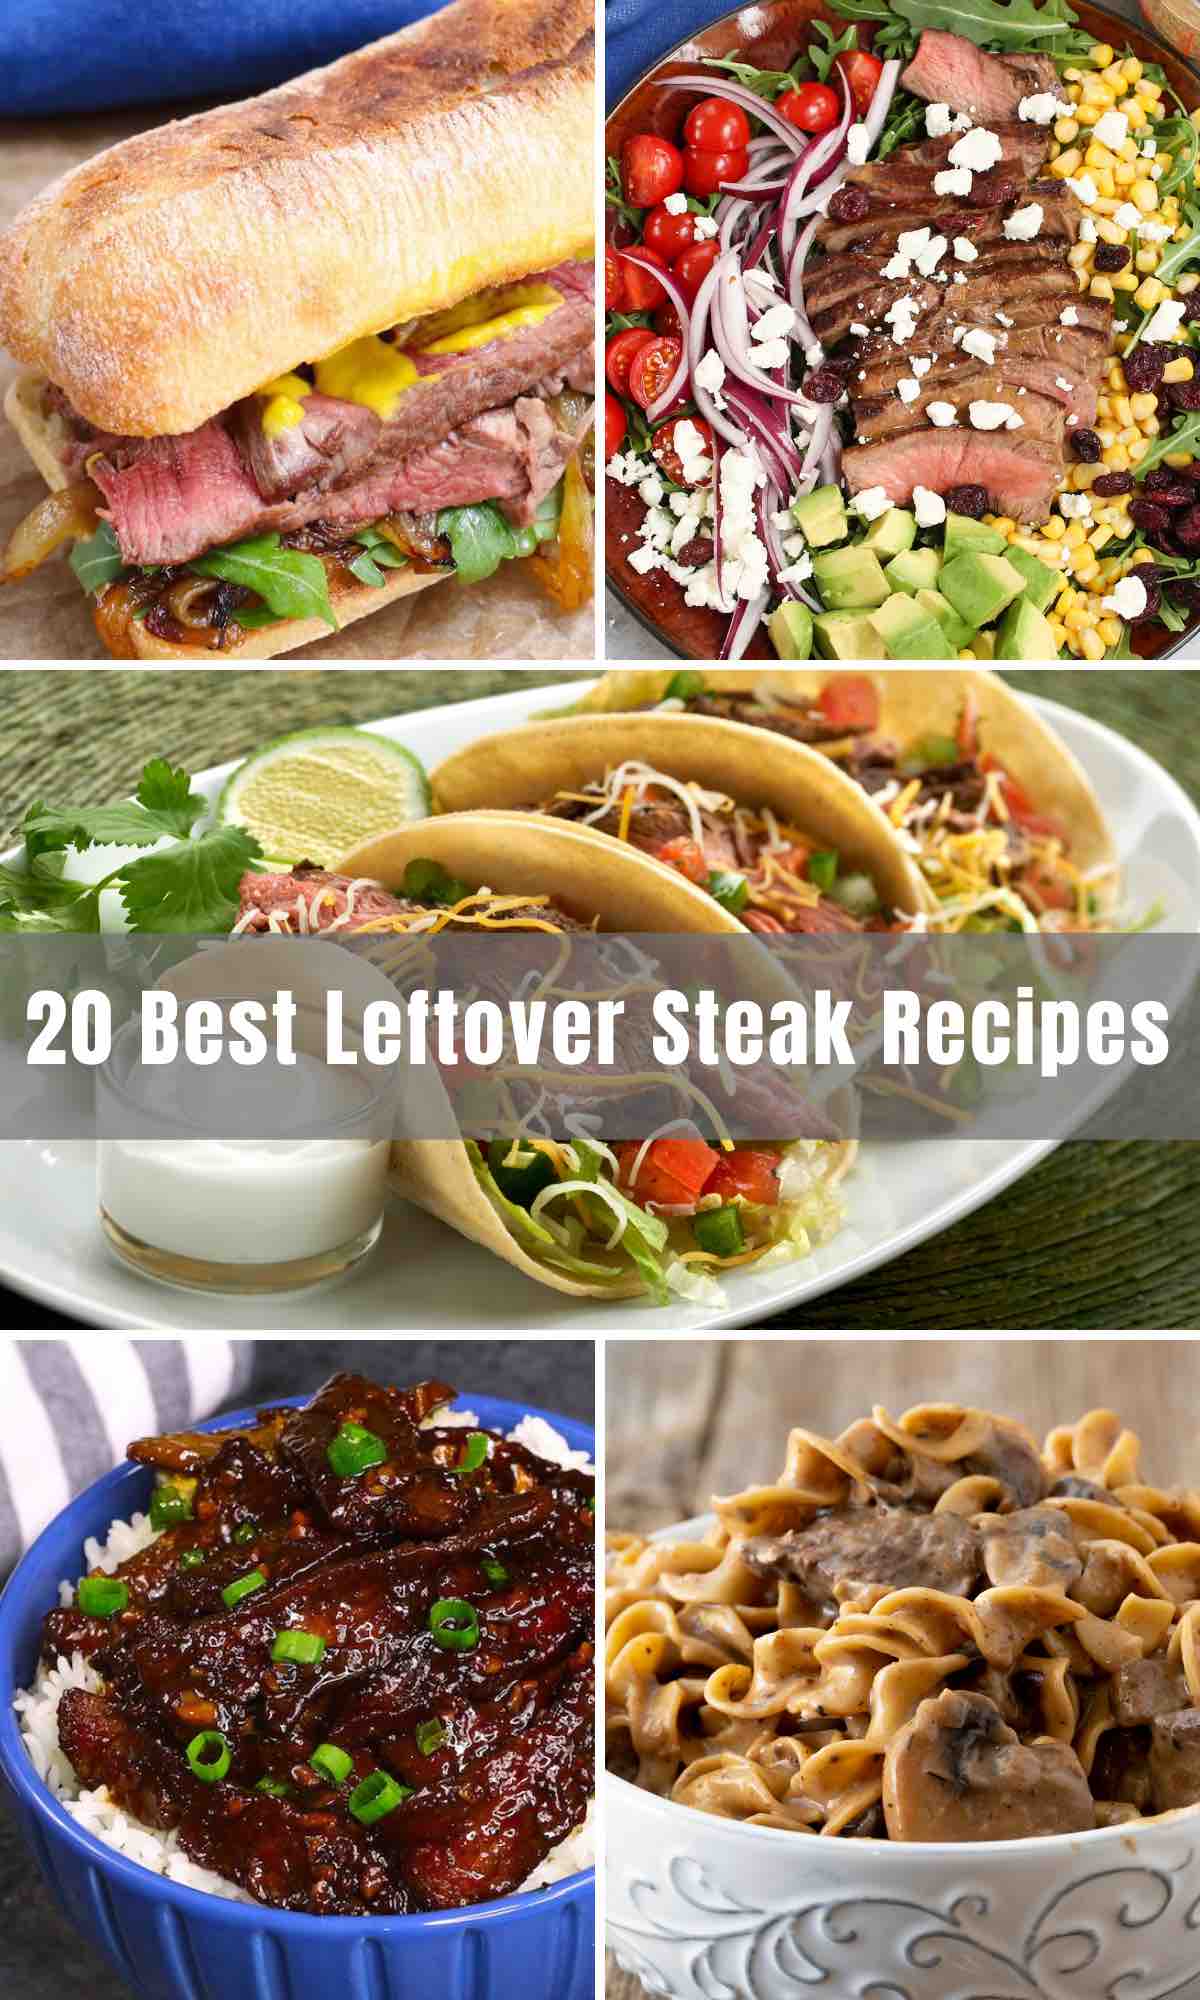 These 20 delicious Leftover Steak Recipes are the best ways to use up the extra steak. From stroganoff to stir-fry to quesadillas, you’ll never wonder what to do with leftover steak again!